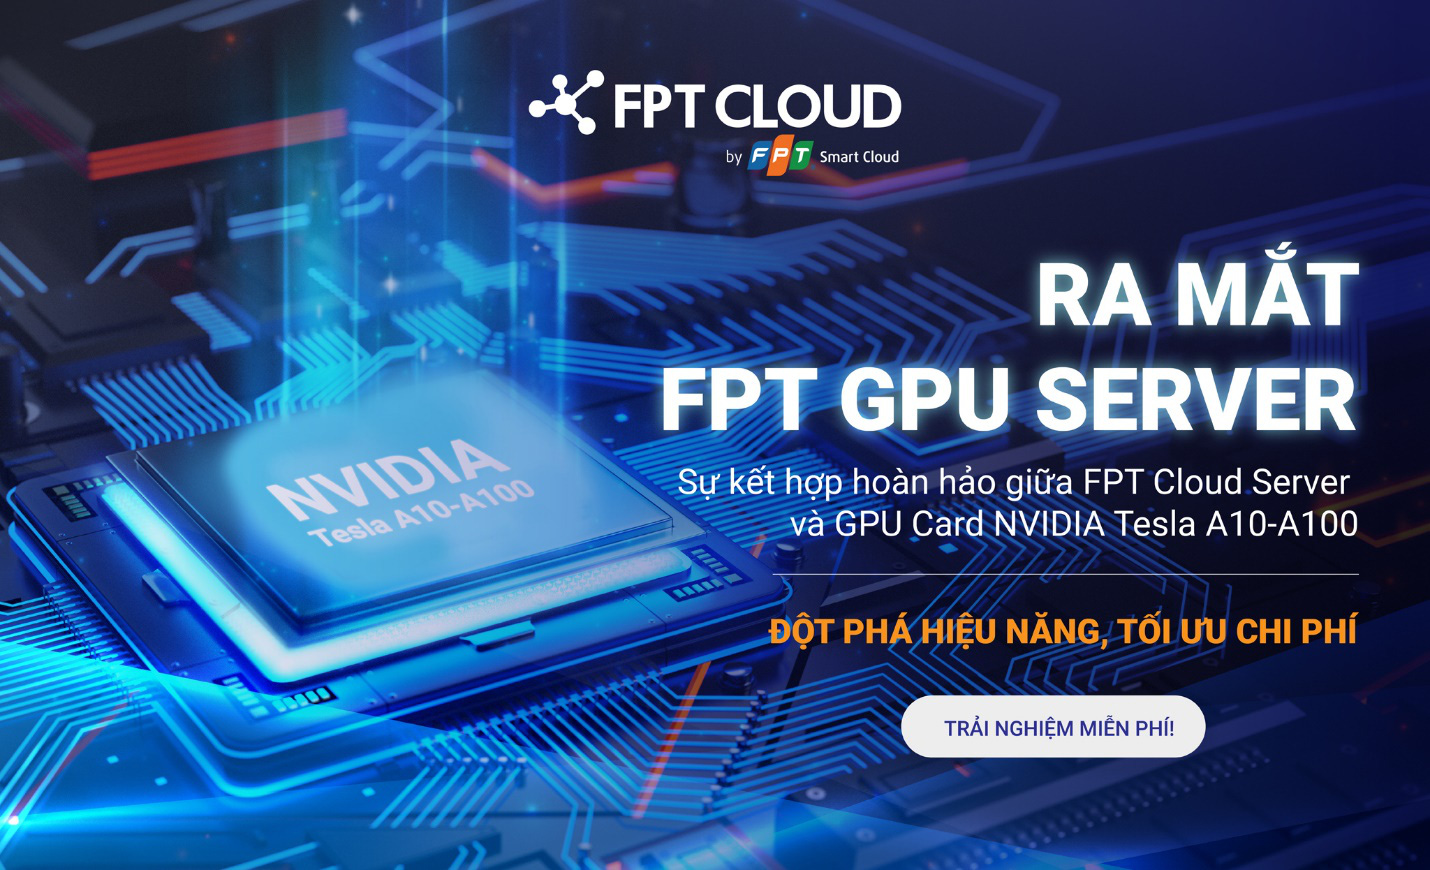 FPT Cloud launches new generation GPU Server service - Photo 1.